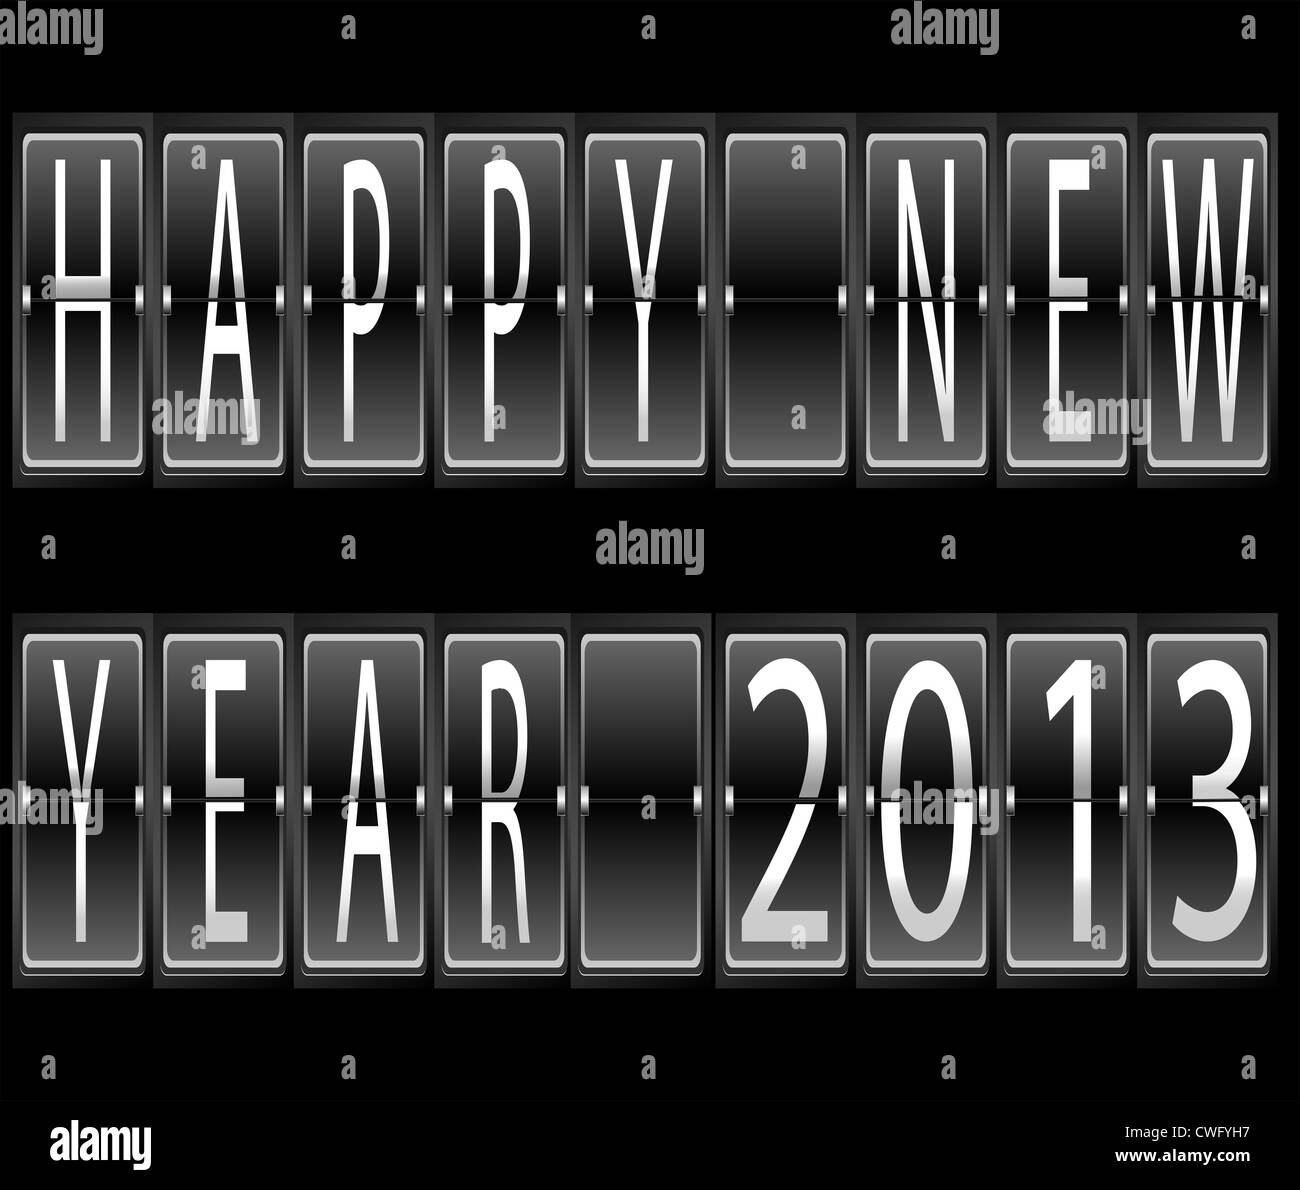 happy New Year 2013 Set of letters and numbers on a mechanical timetable terminal vector illustration Stock Photo